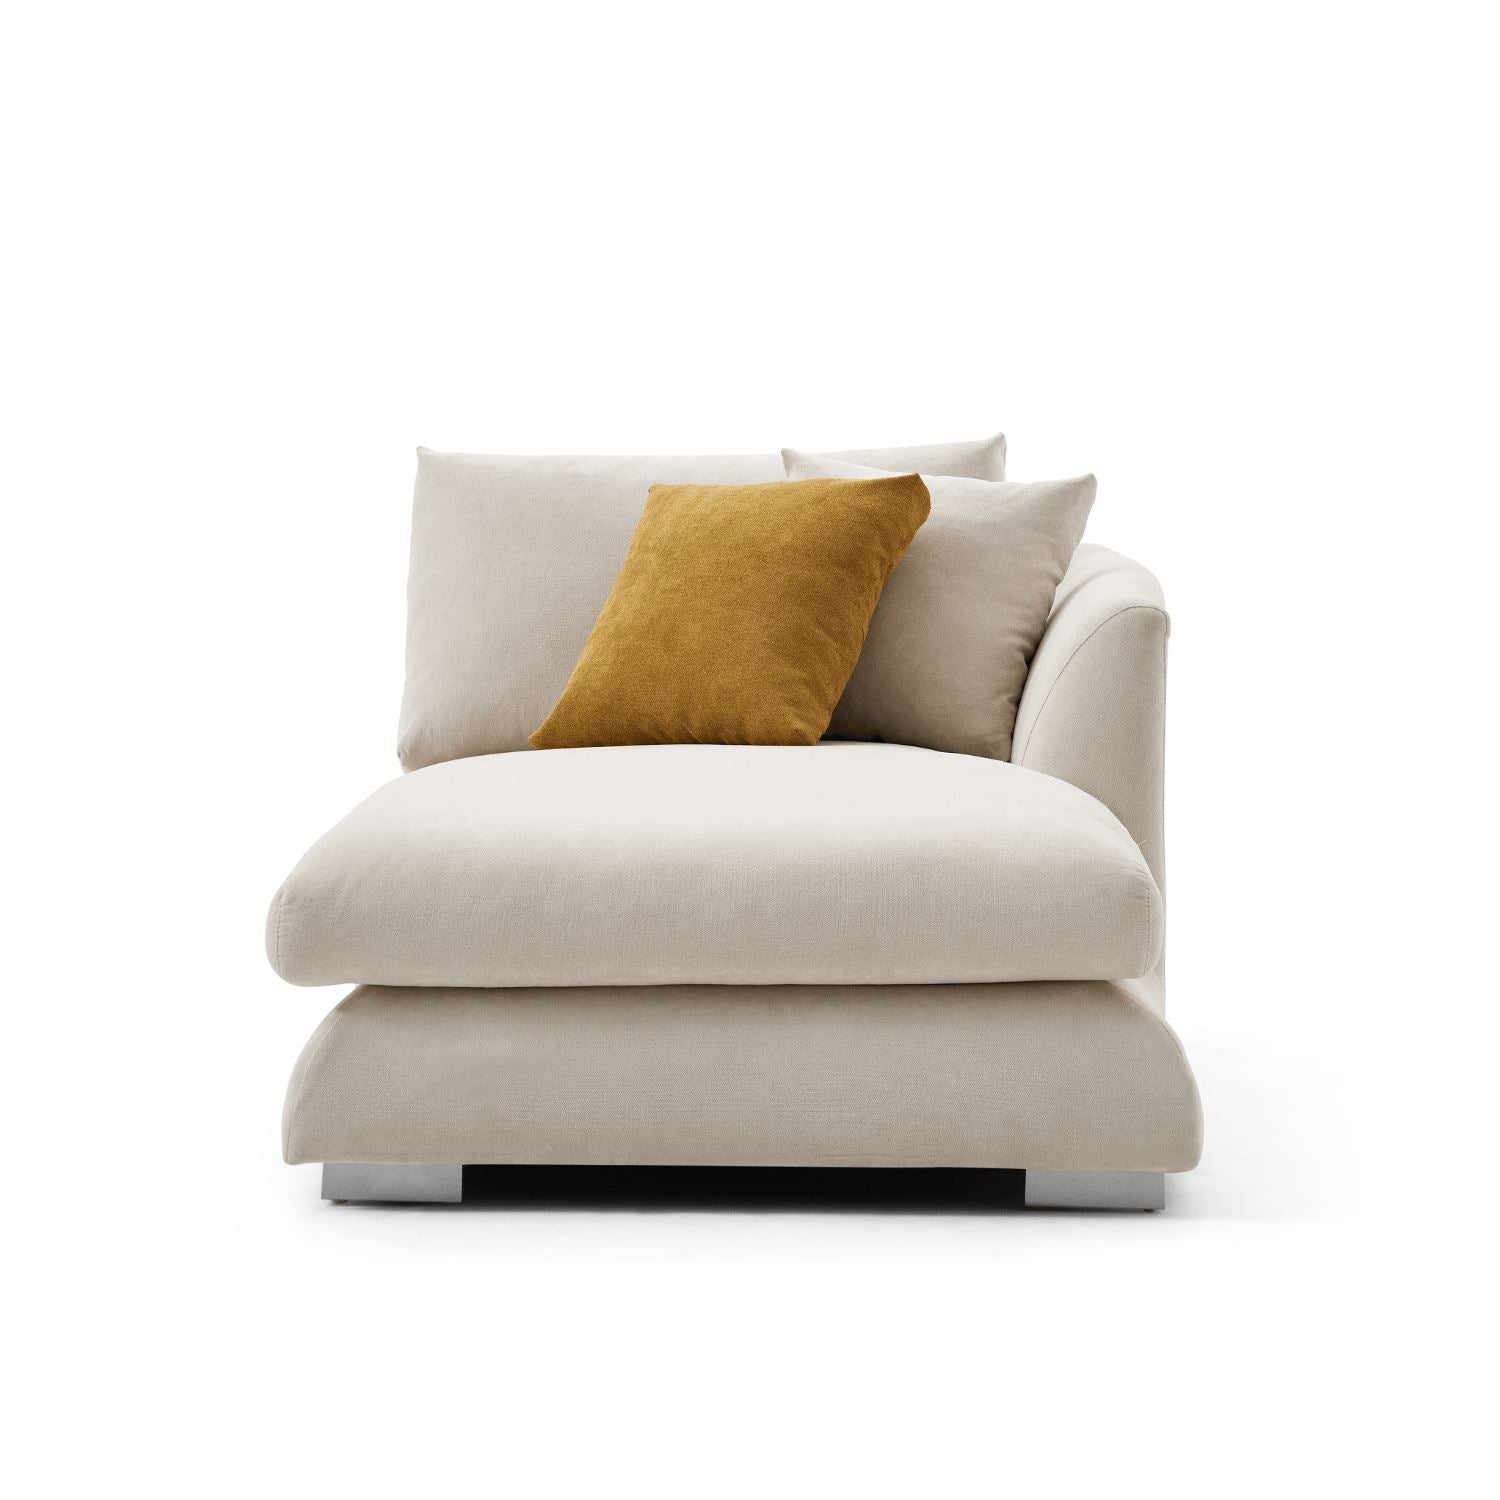 Feathers - Chaise - Mario Capasa Right Beige